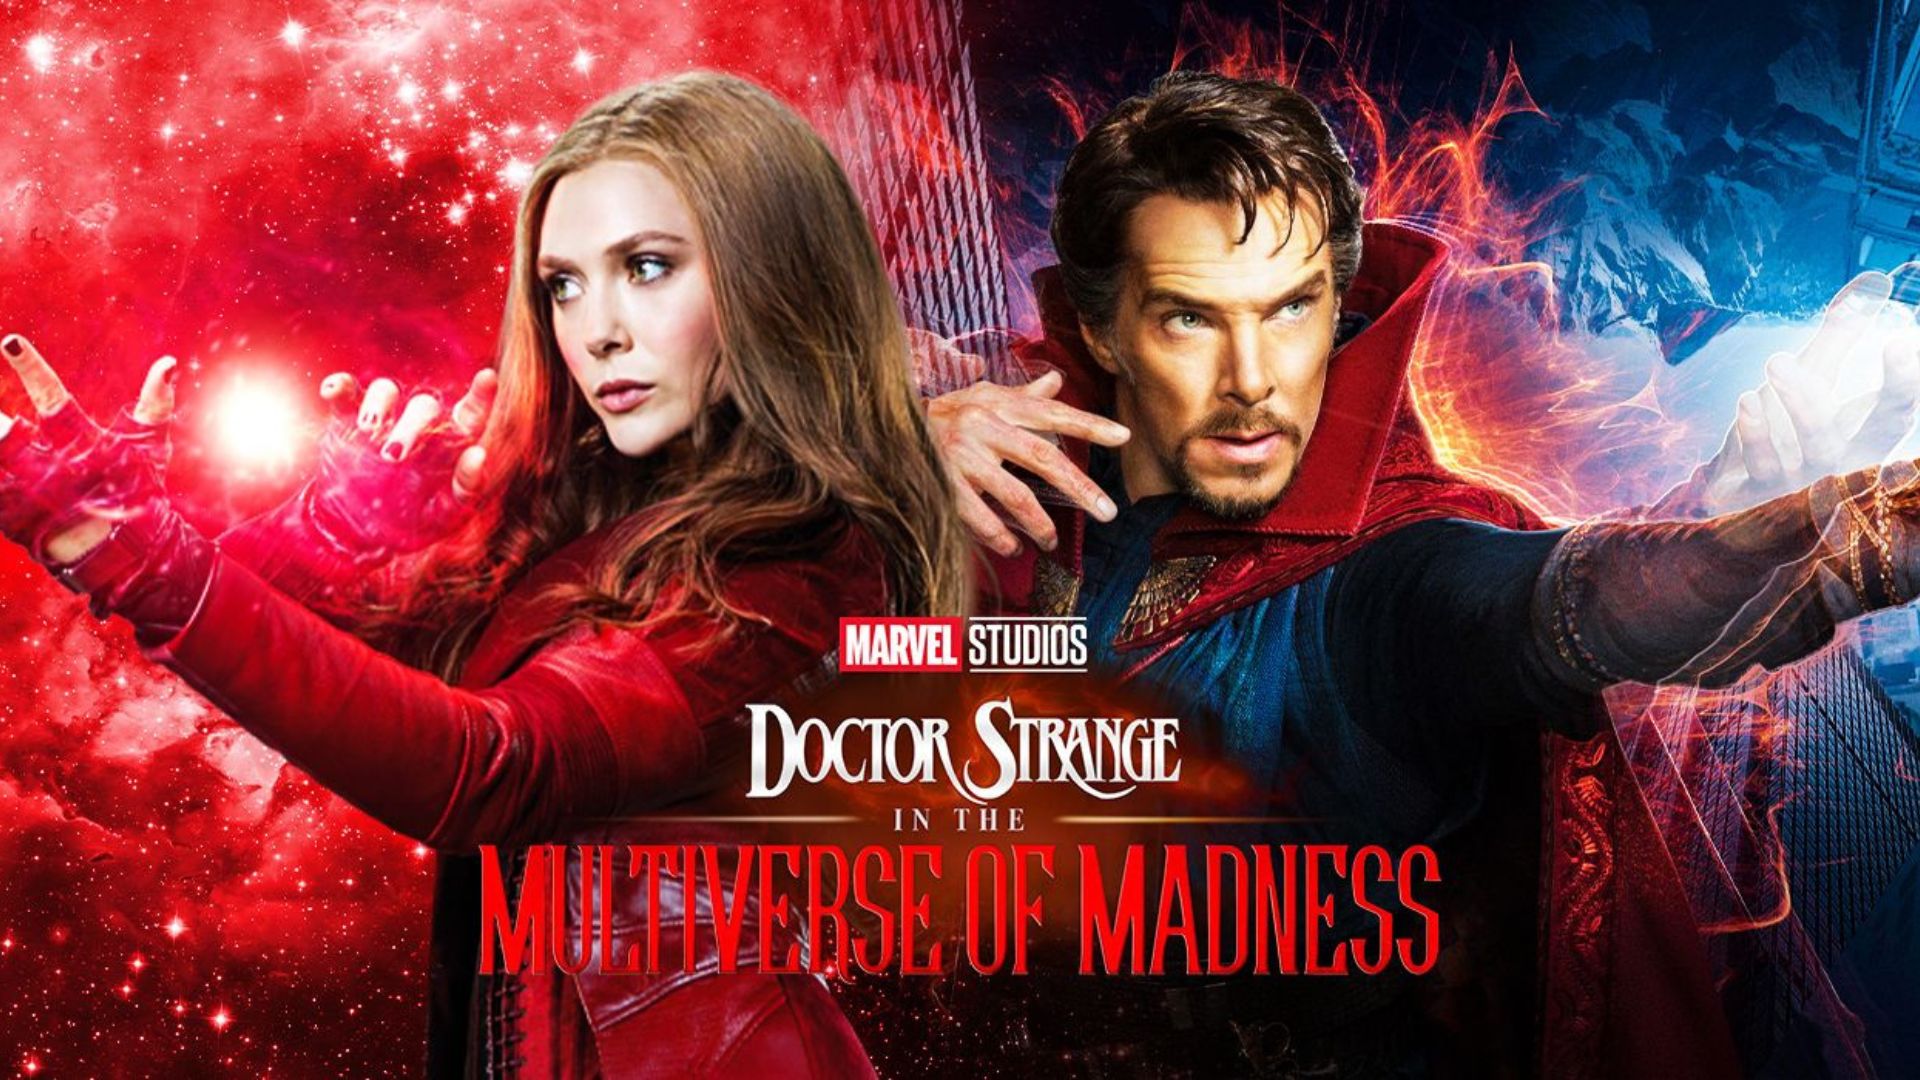 The Marvel Fans Manual to Doctor Strange in the Multiverse of Madness